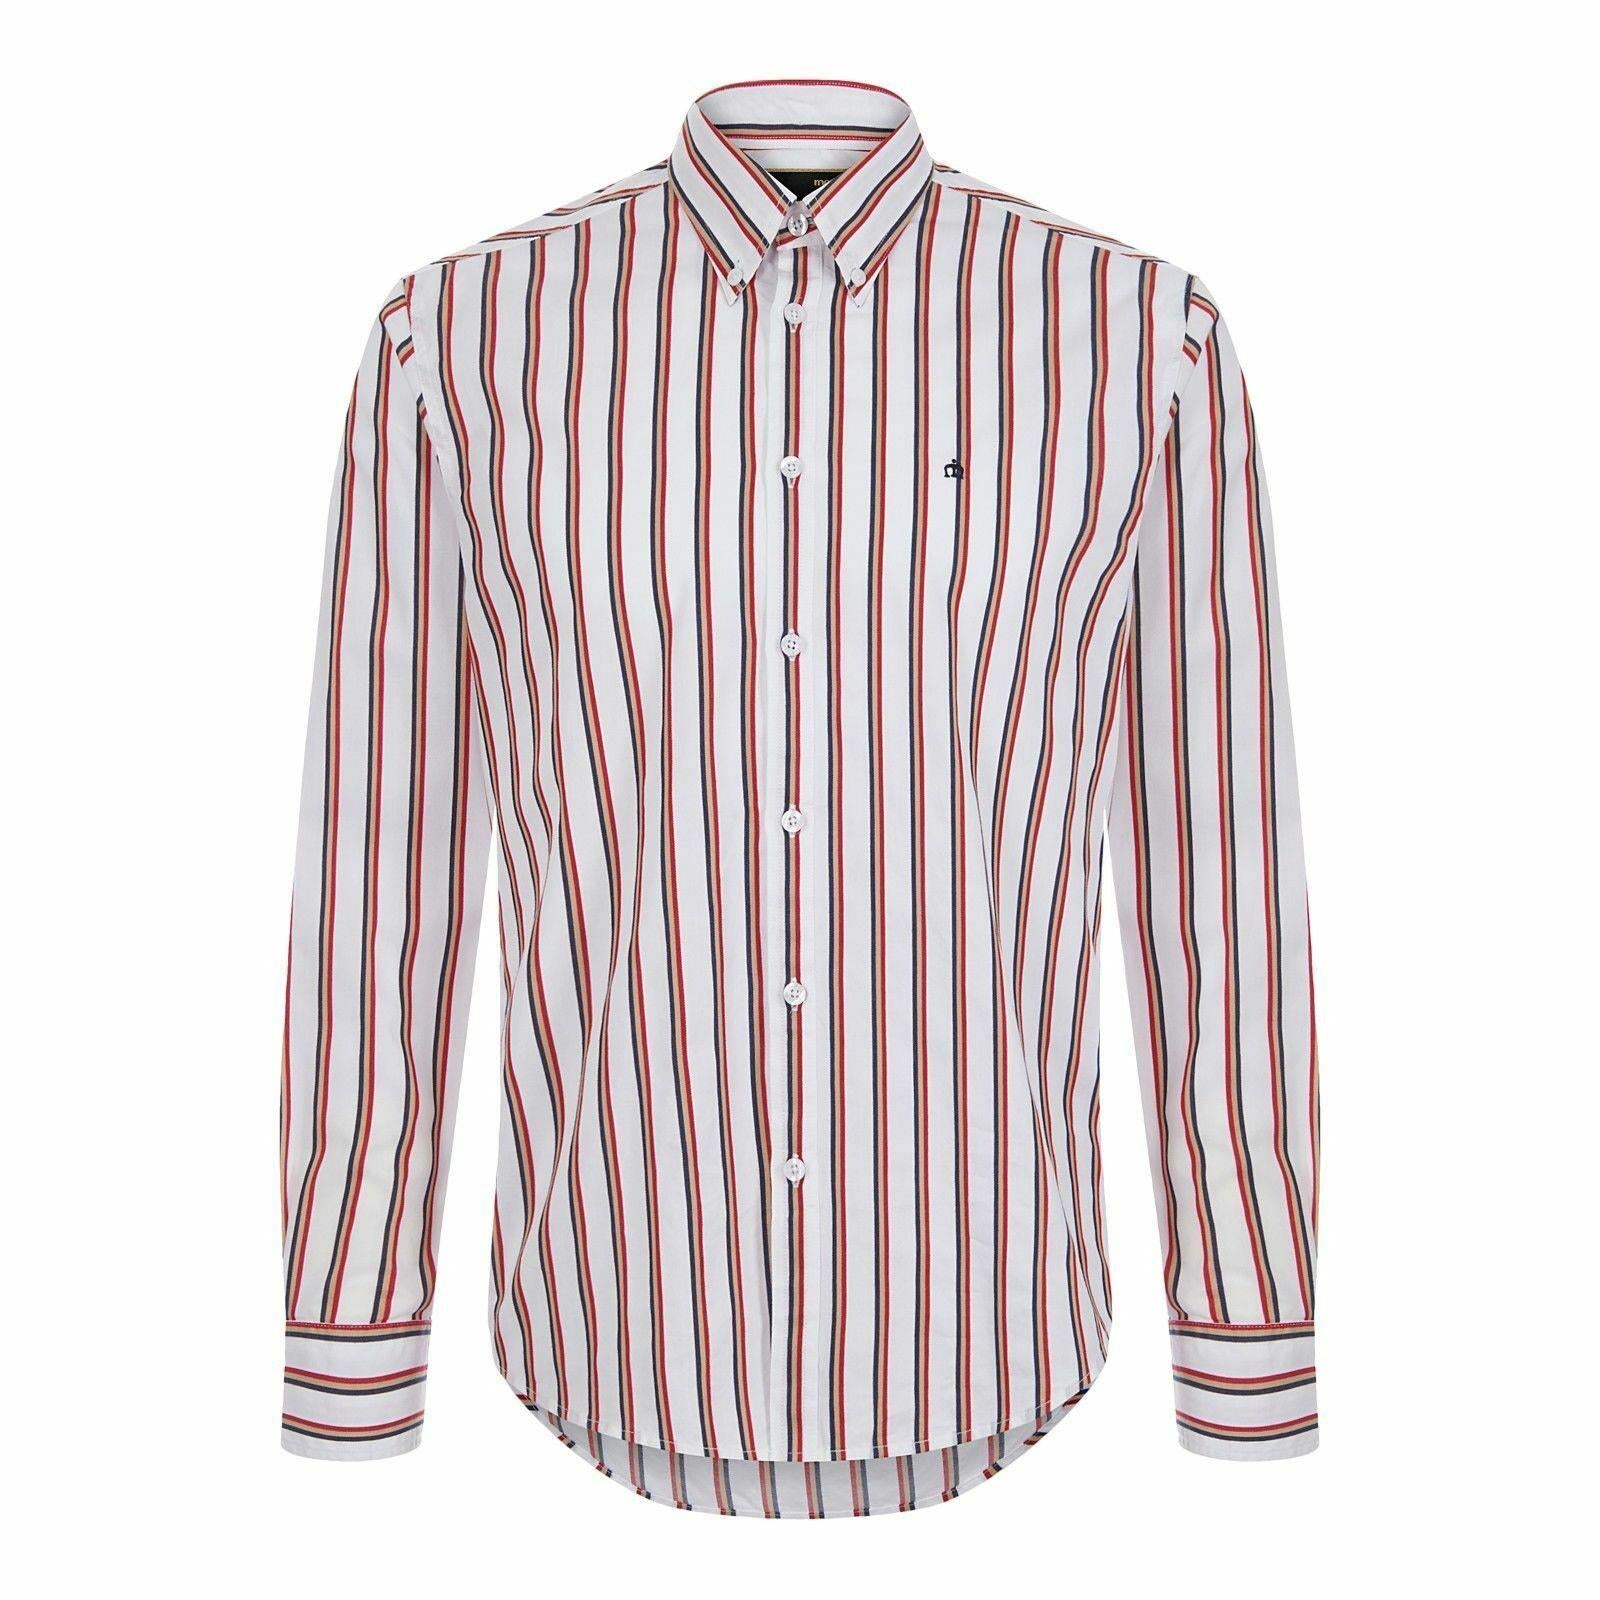 MERC Elsted white long-sleeve striped cotton shirt